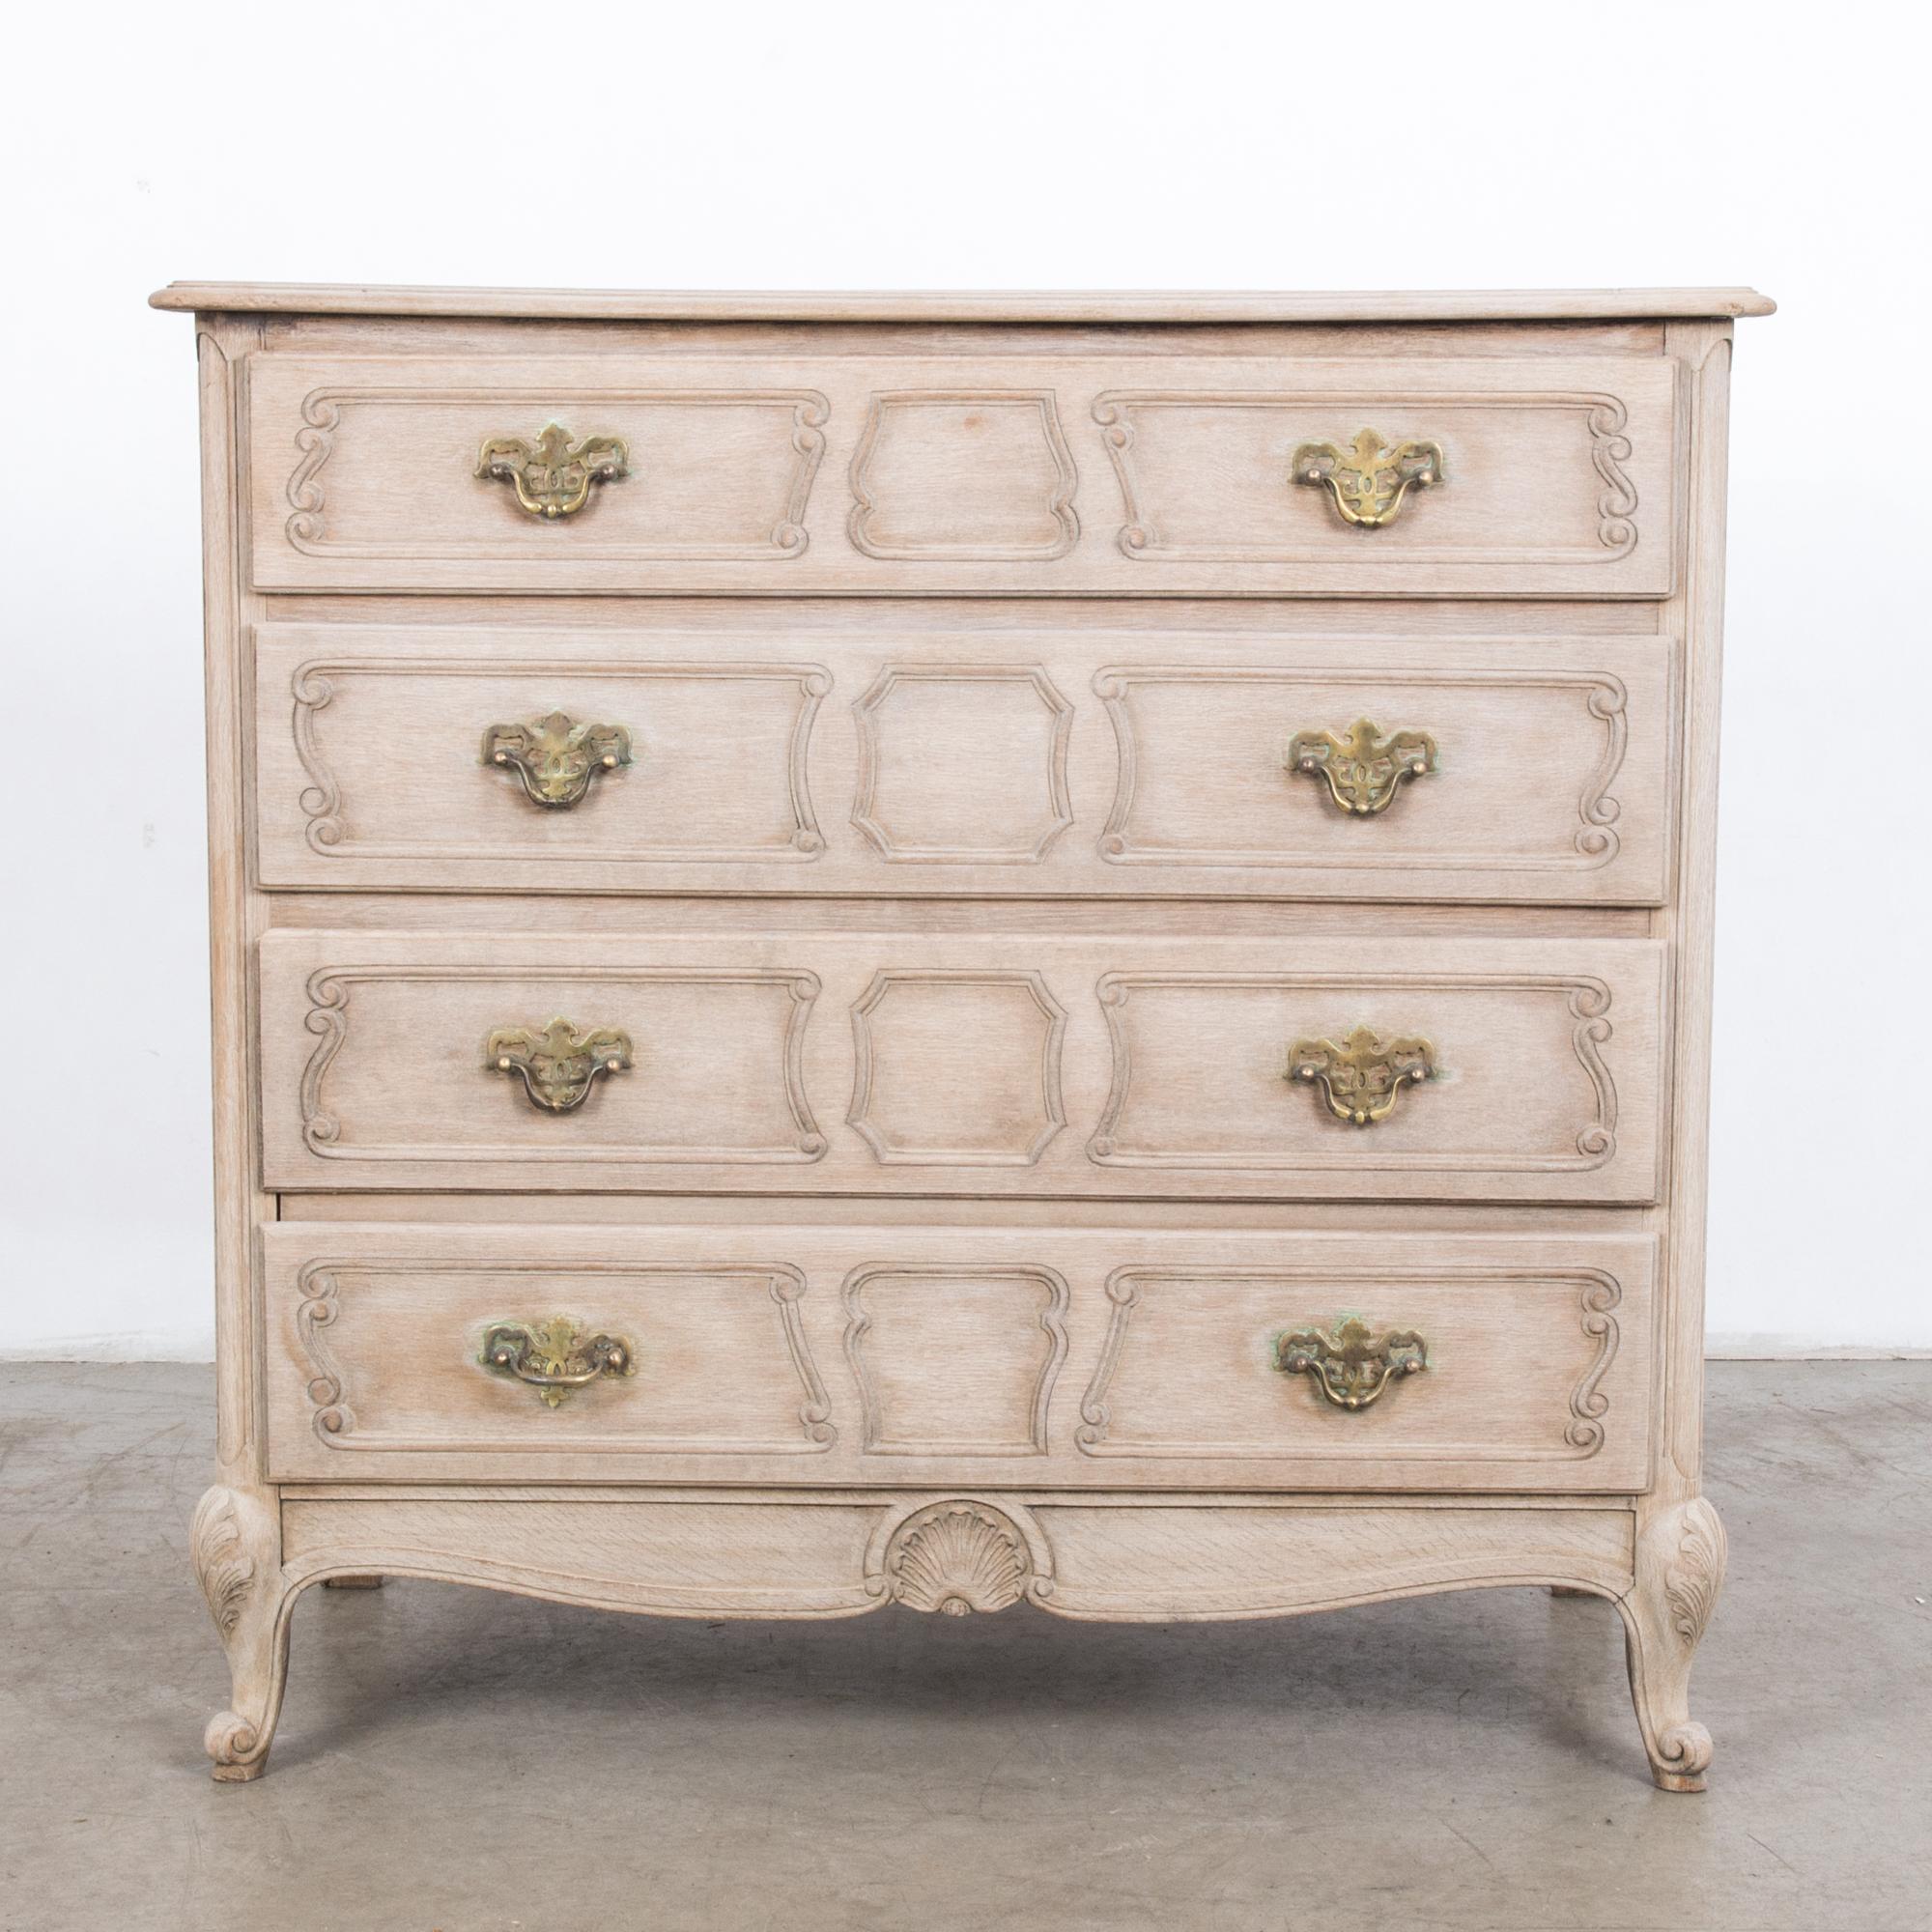 From Belgium circa 1960, a four-drawer chest in raw oak finish. The simple shape and subtle ornament is accentuated by cast bronze handles. Produced with traditional techniques and seasoned by time, this charming chest is a practical and stylish